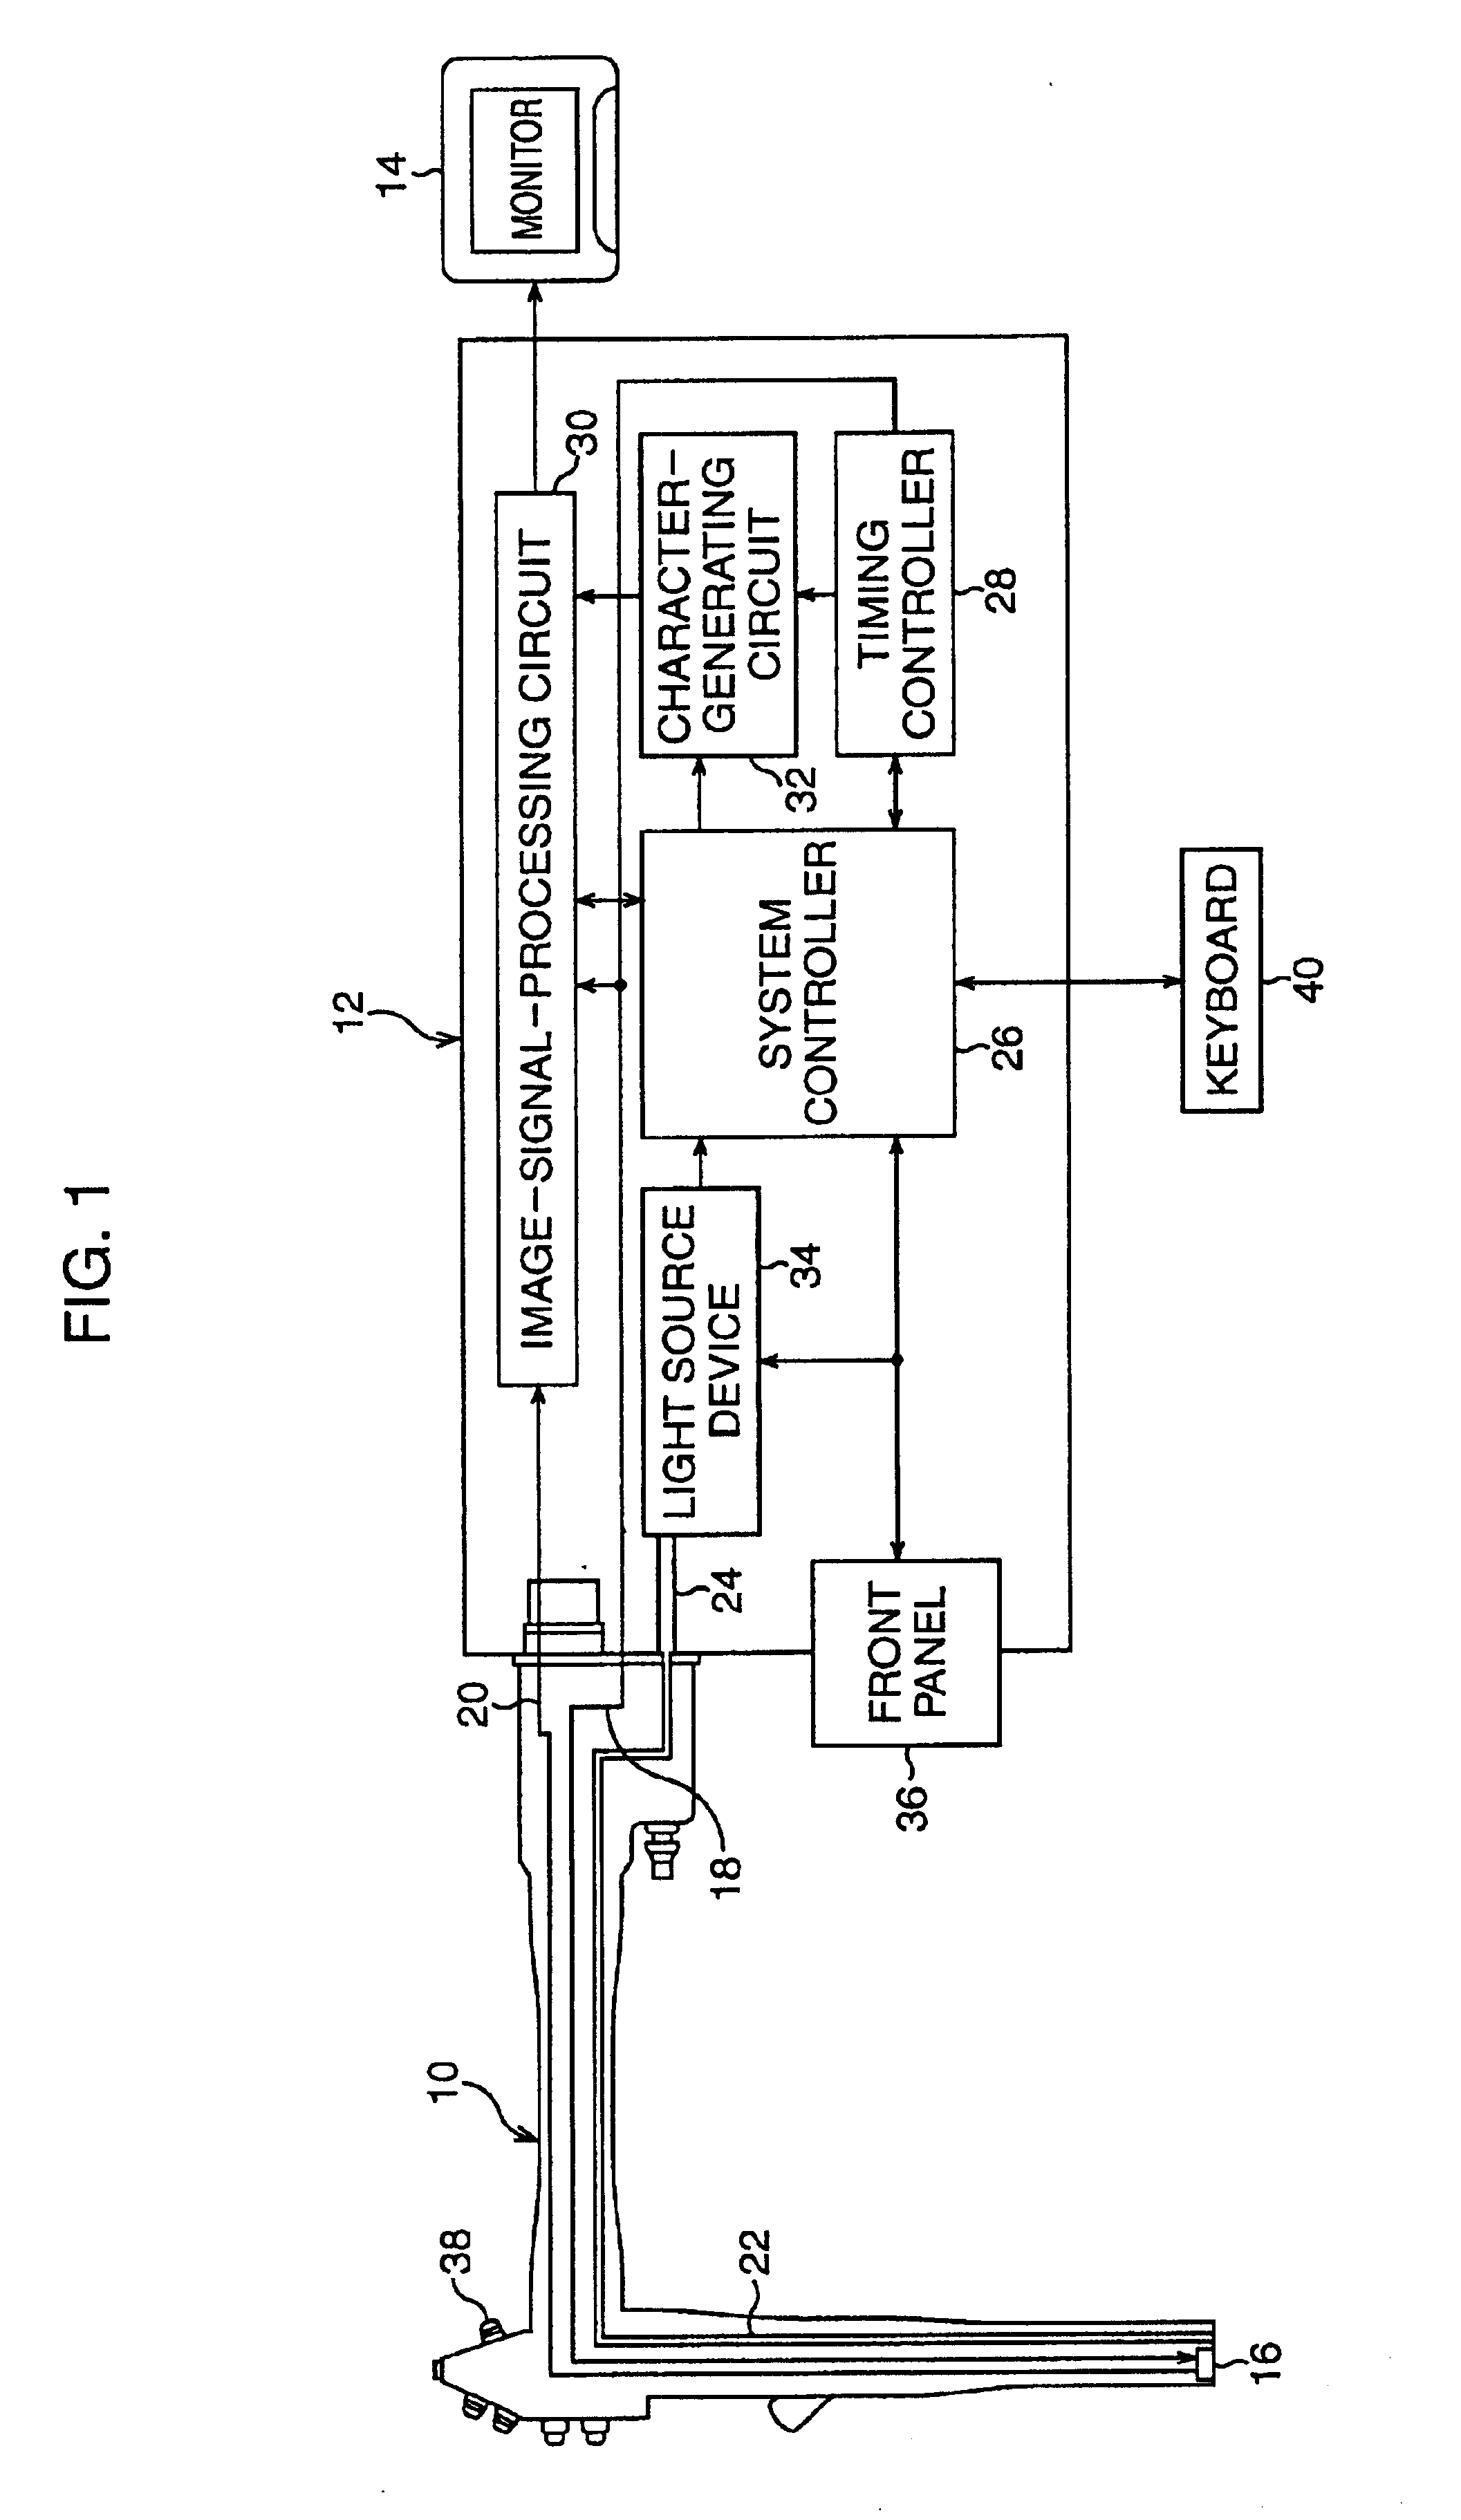 Organ-region-indication system incorporated in electronic endoscope system